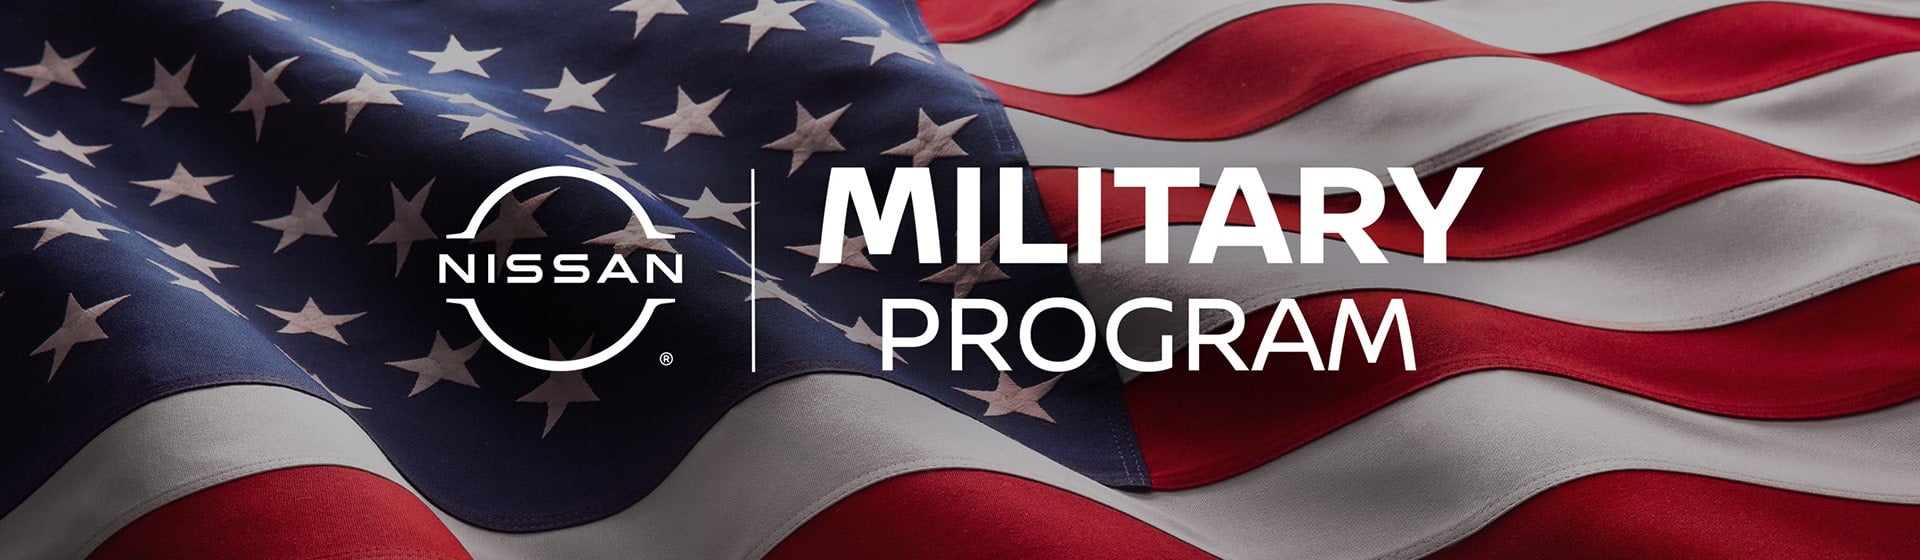 Nissan Military Discount | Lia Nissan of Colonie in Schenectady NY